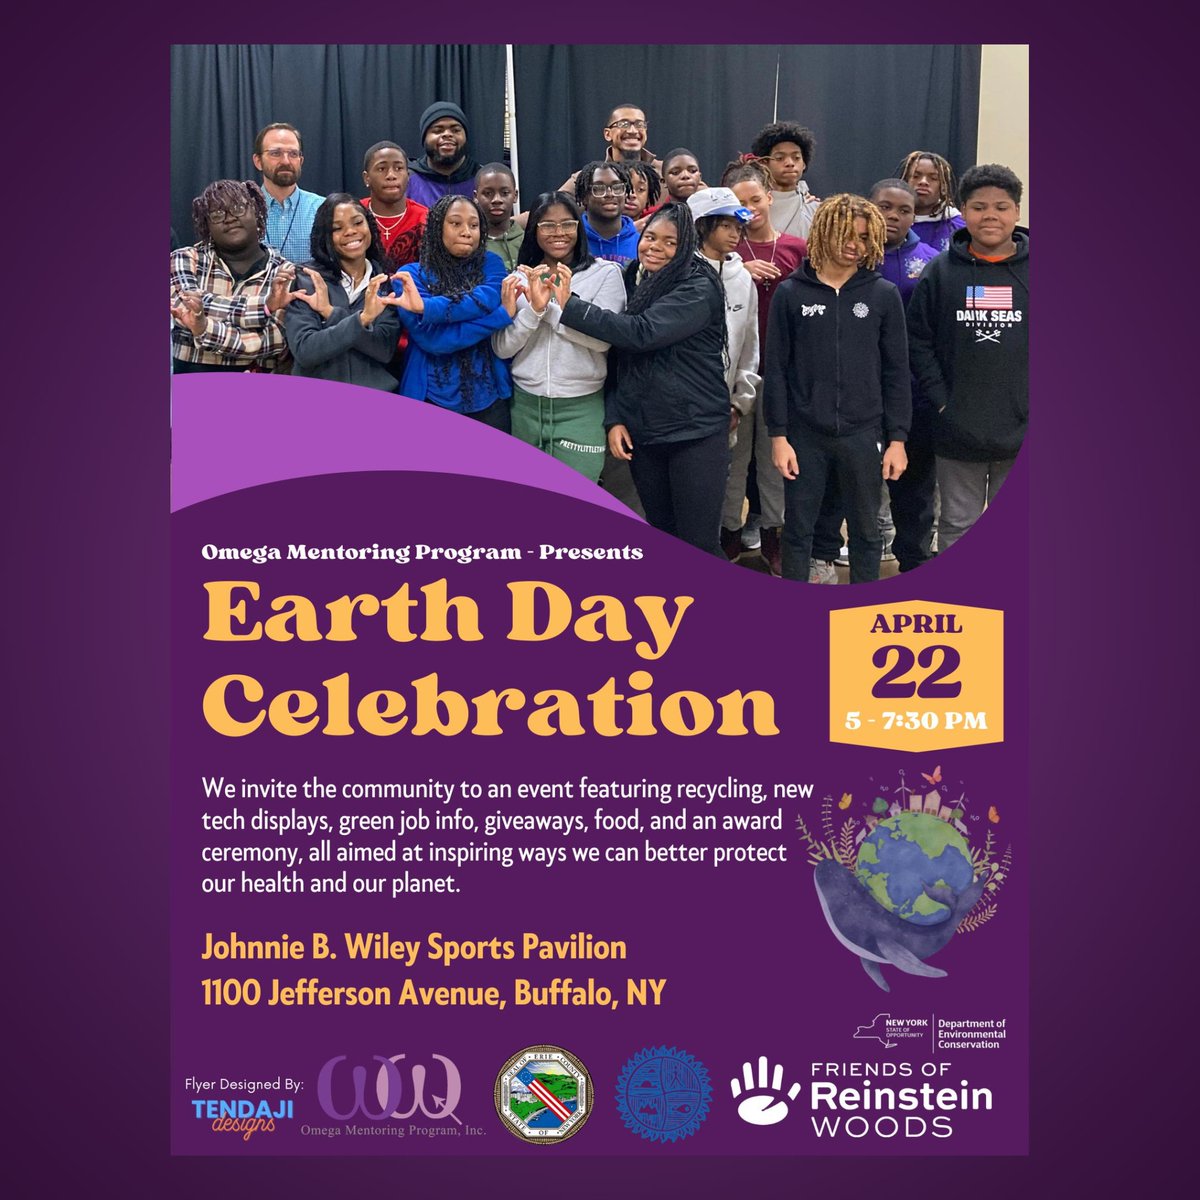 🌎 Join @ErieCoDEP tomorrow for an #EarthDay celebration: recycling, new tech, green job info, giveaways, food, & awards, all inspiring ways to better protect our health & planet. • Mon., April 22, 5 – 7:30 PM • Johnnie B. Wiley Sports Pavilion, 1100 Jefferson Ave., Buffalo